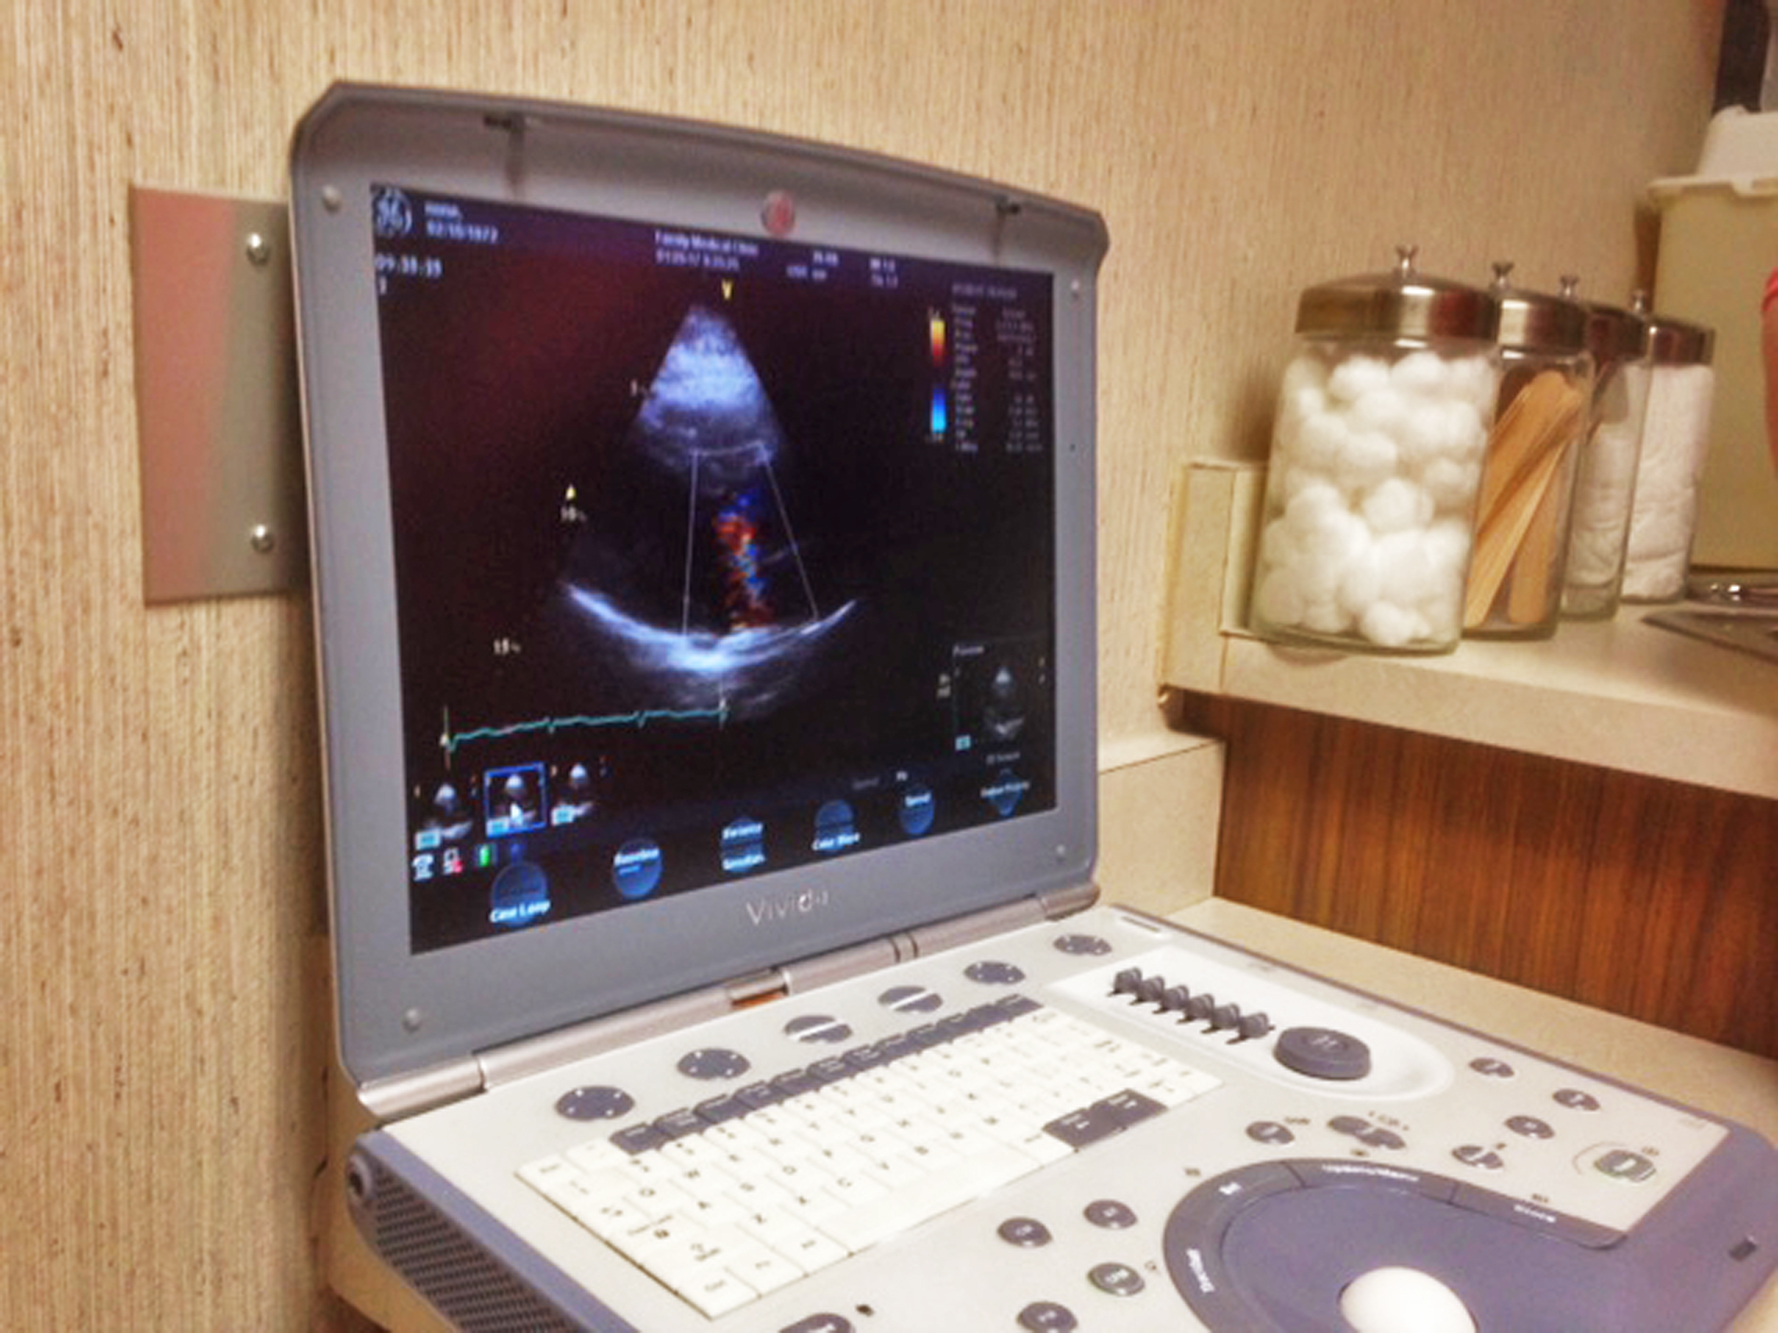 A portable ultrasound machine shows an image of a patient’s heart function in an exam room at Family Medical Clinic on Thursday, Jan. 26, 2017 in Soldotna, Alaska. The clinic recently began a heart health program called Heartwise, which offers comprehensive screenings for conditions such as stroke, diabetes, varicose veins and other cardiac diseases. (Elizabeth Earl/Peninsula Clarion)